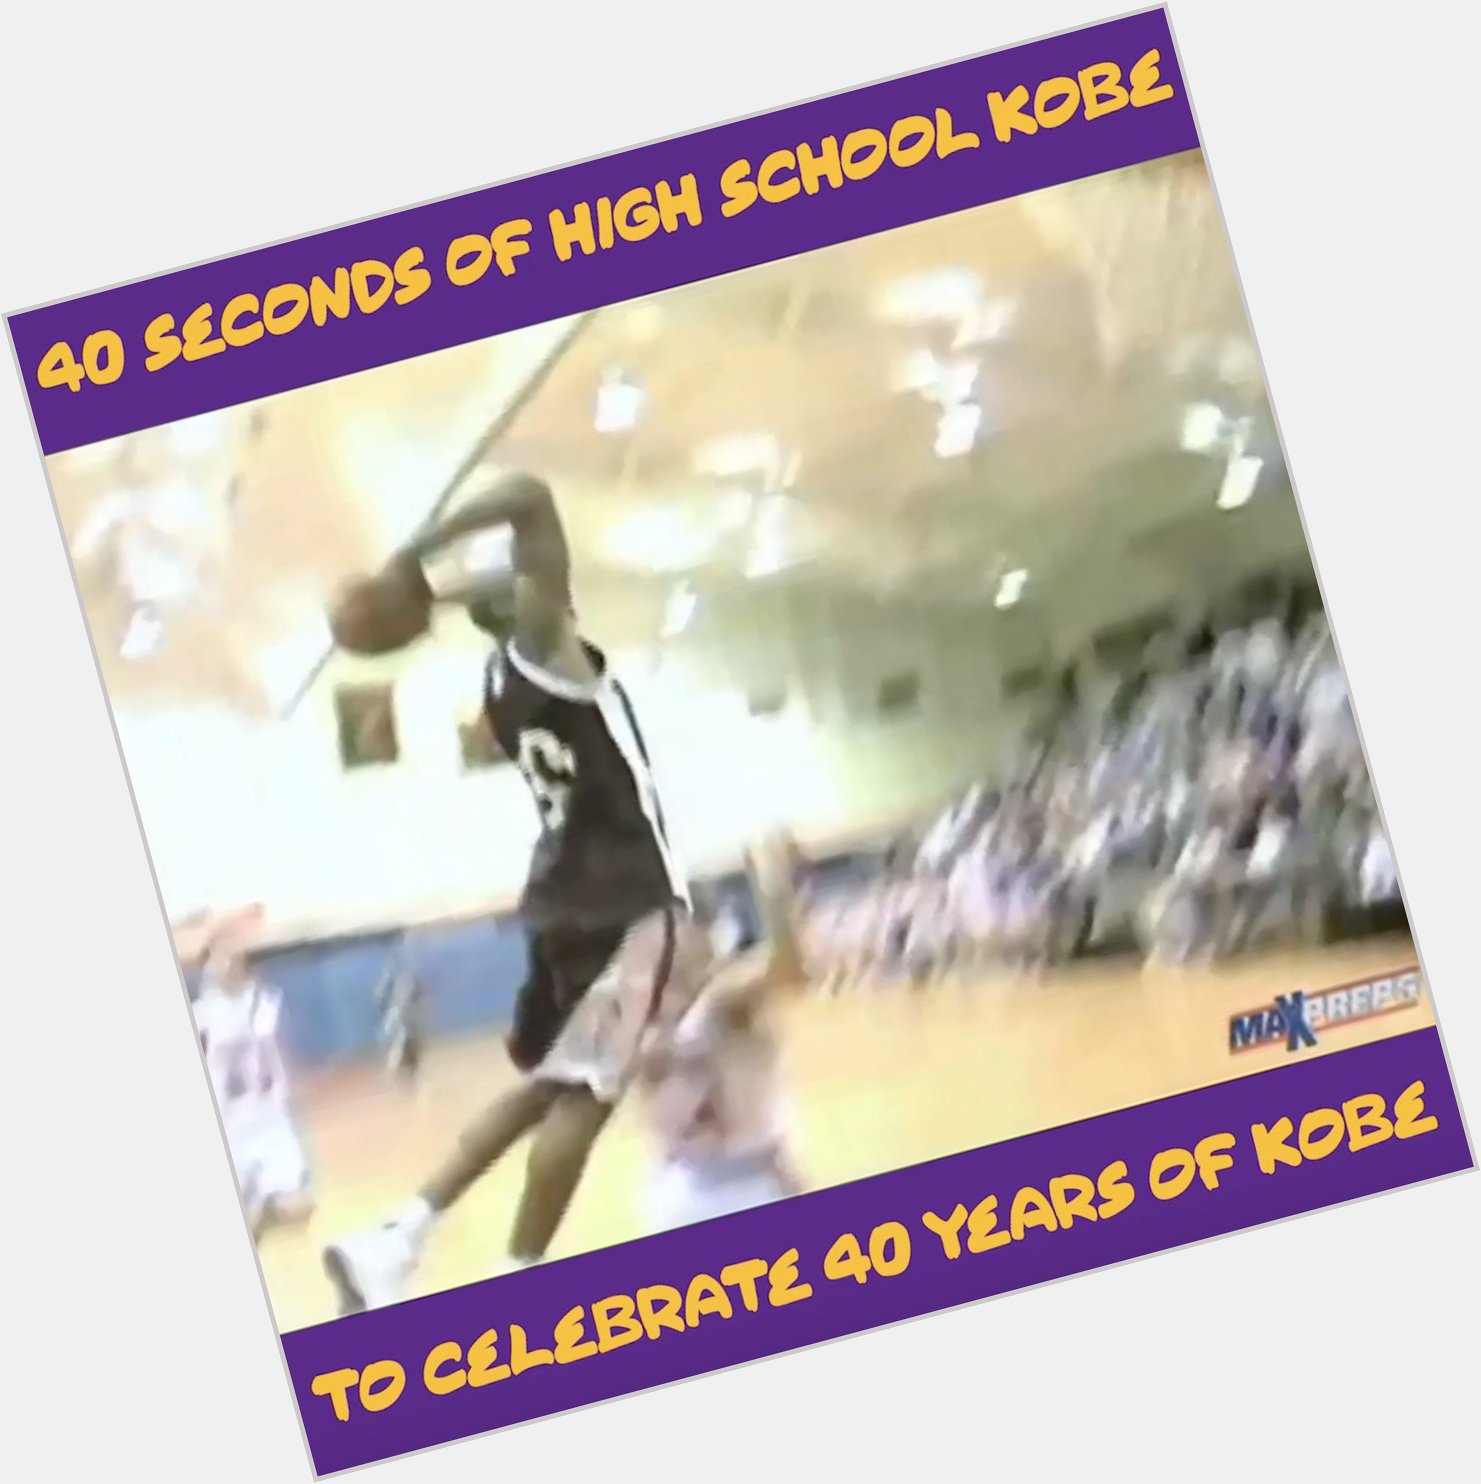 Happy 40th birthday to Kobe Bryant.

Let\s look back to when the Black Mamba dominated the high school scene. 